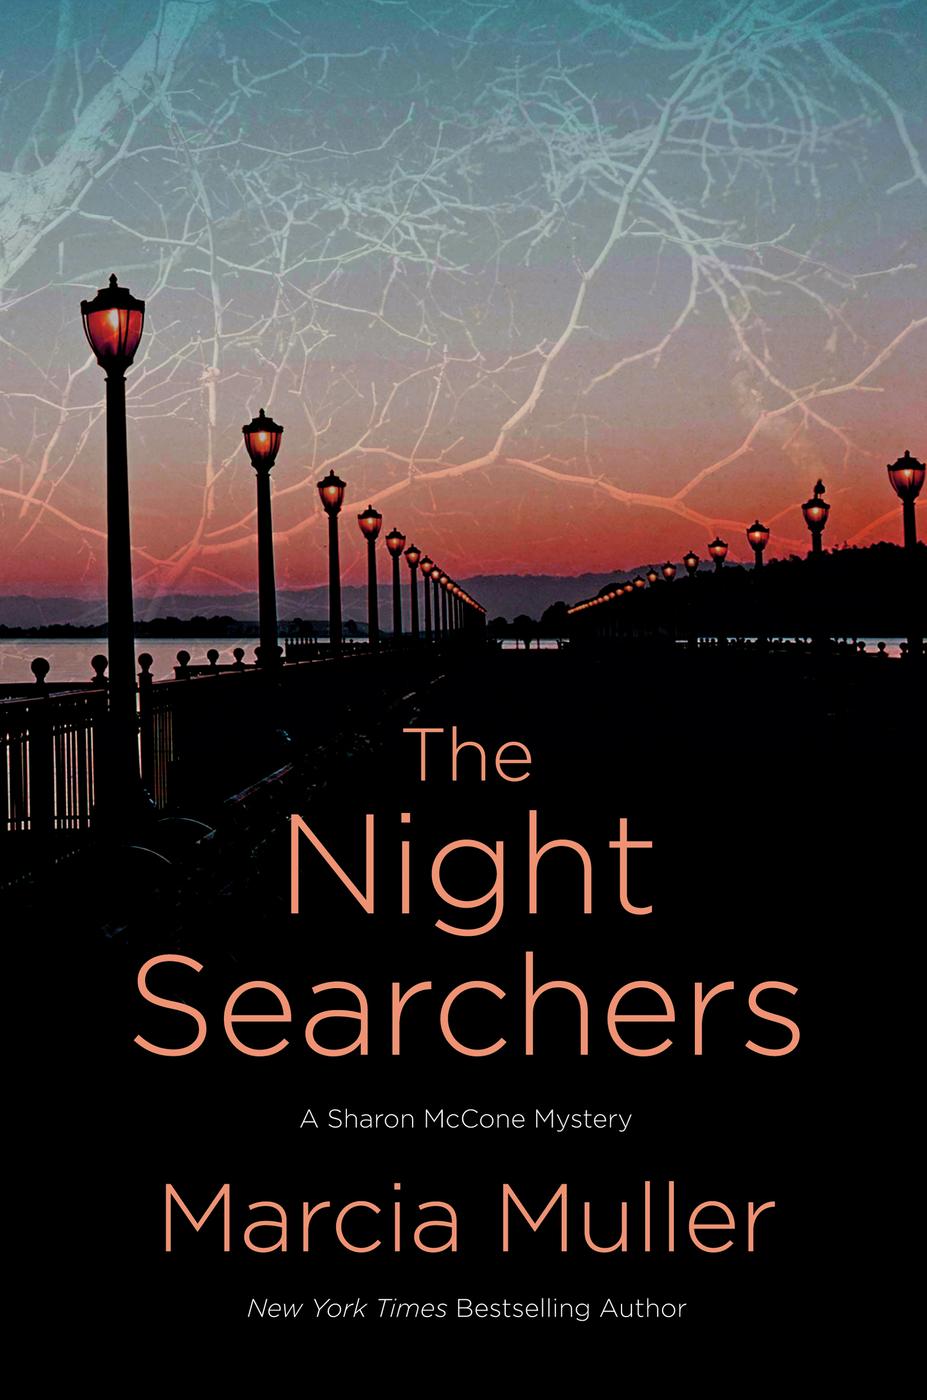 The Night Searchers (A Sharon McCone Mystery)